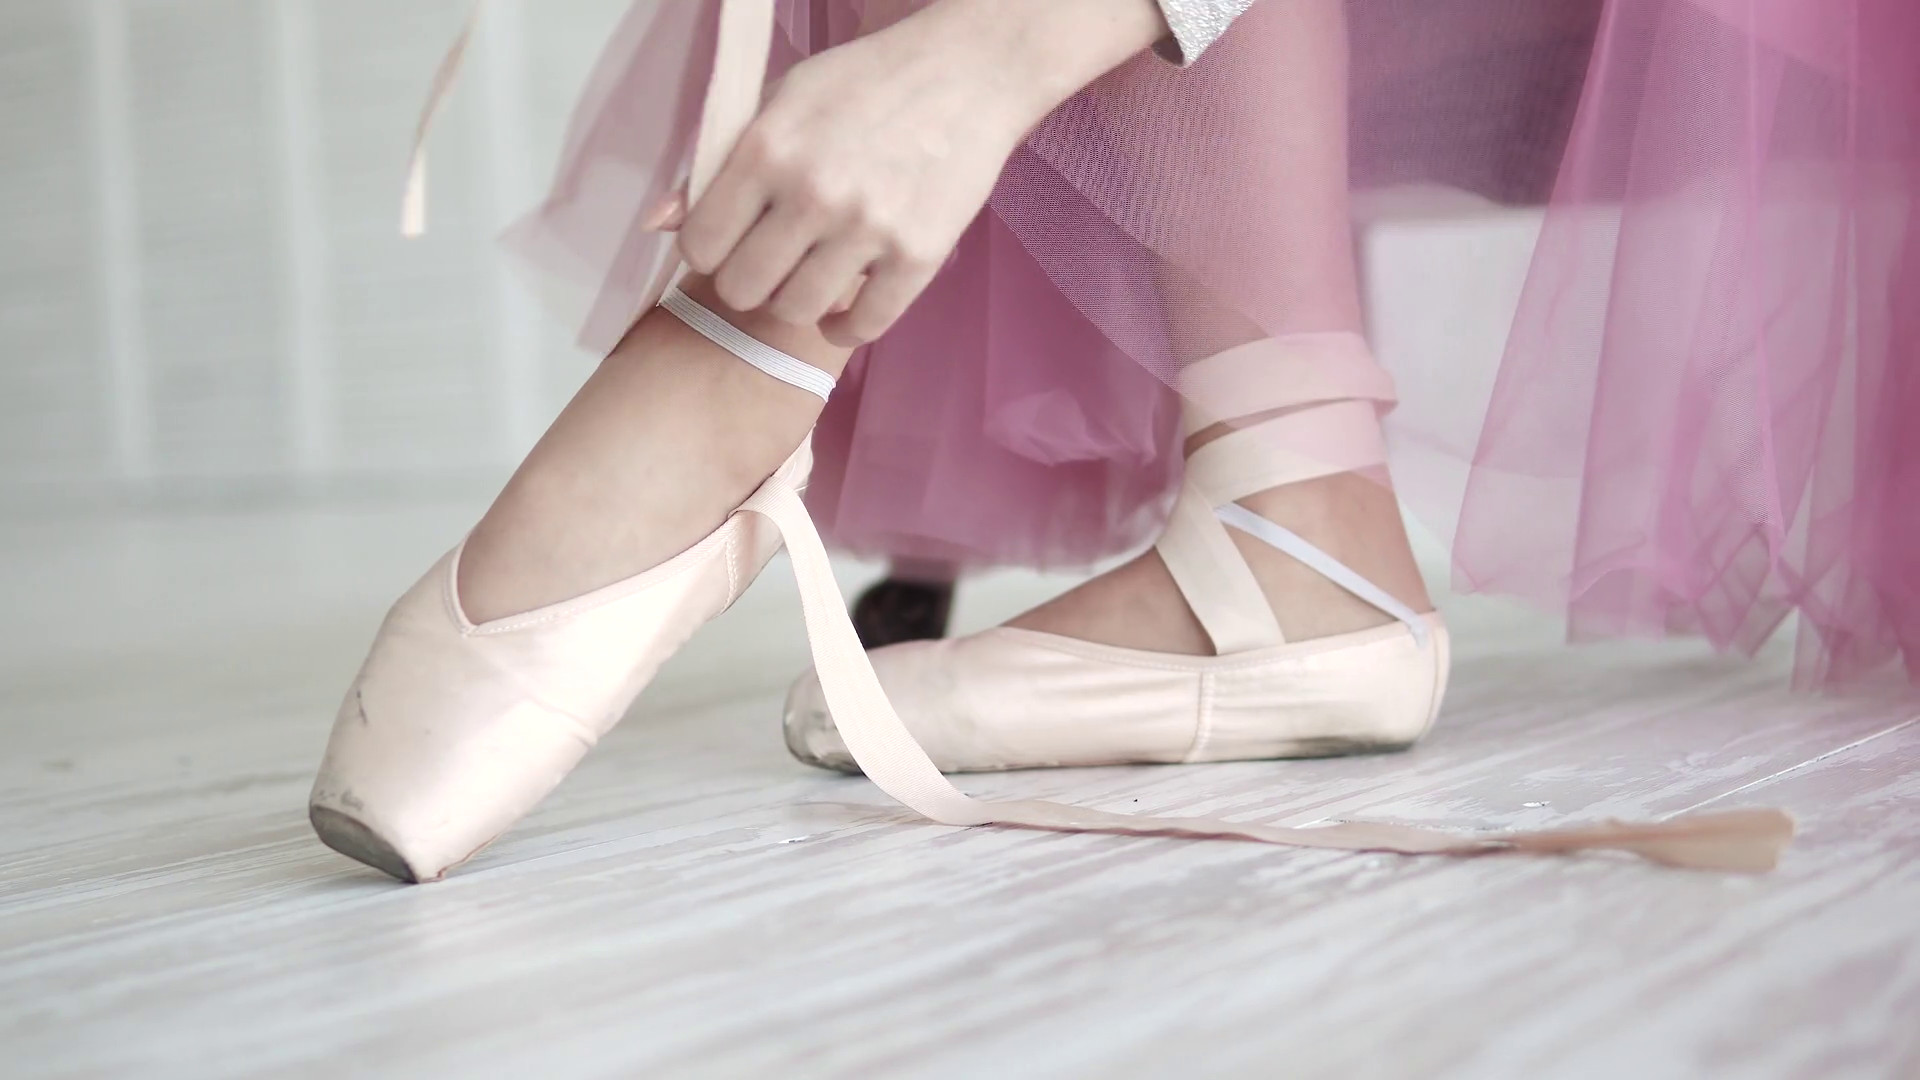 1920x1080 ballerina tying the pointes. ballet dancer wearing ballet shoes in the  studio Stock Video Footage - Storyblocks Video